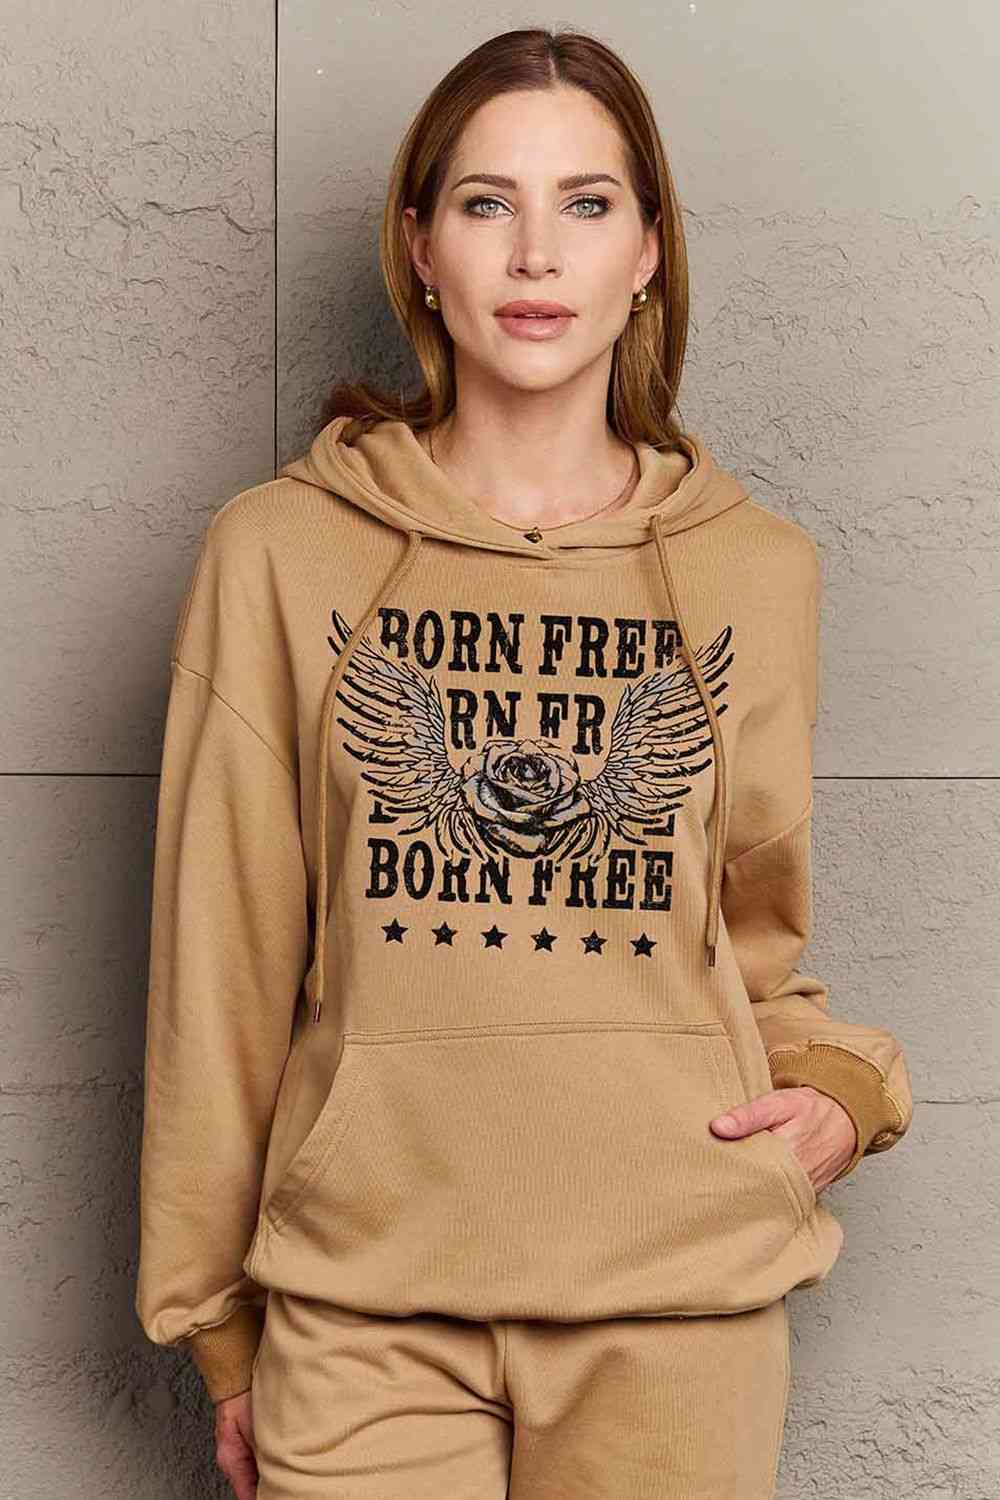 Simply Love Simply Love Full Size BORN FREE Graphic Hoodie